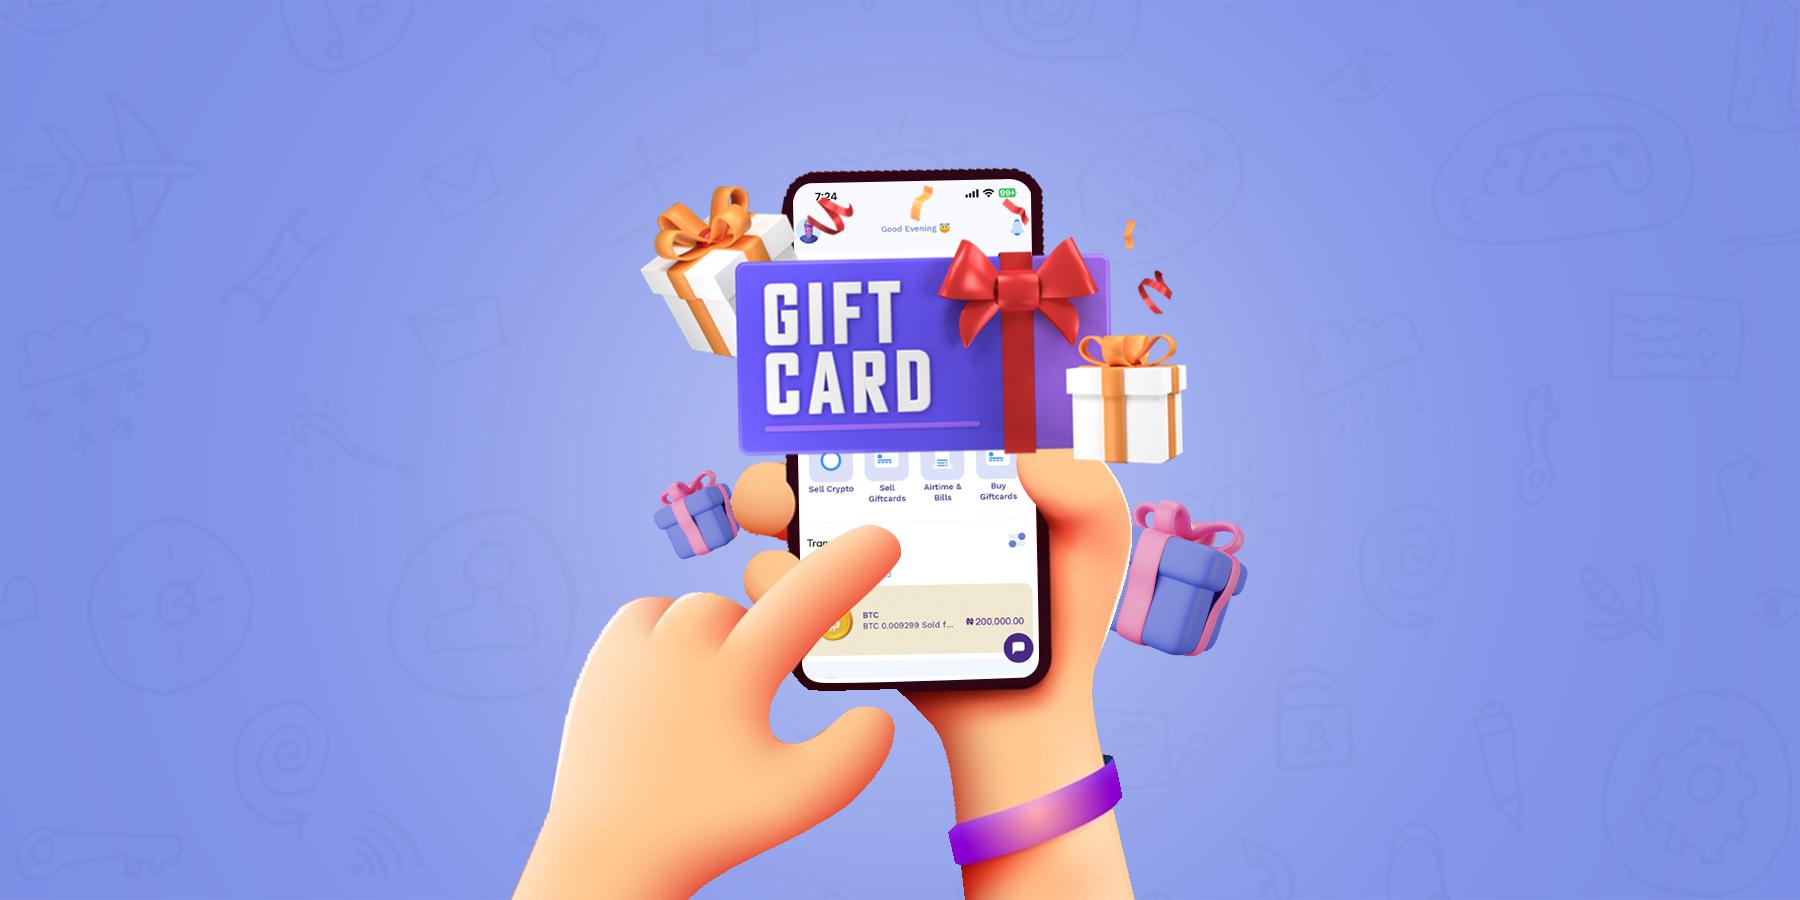 Gift Cards - Buy Gift Vouchers Online in India from MakeMyTrip